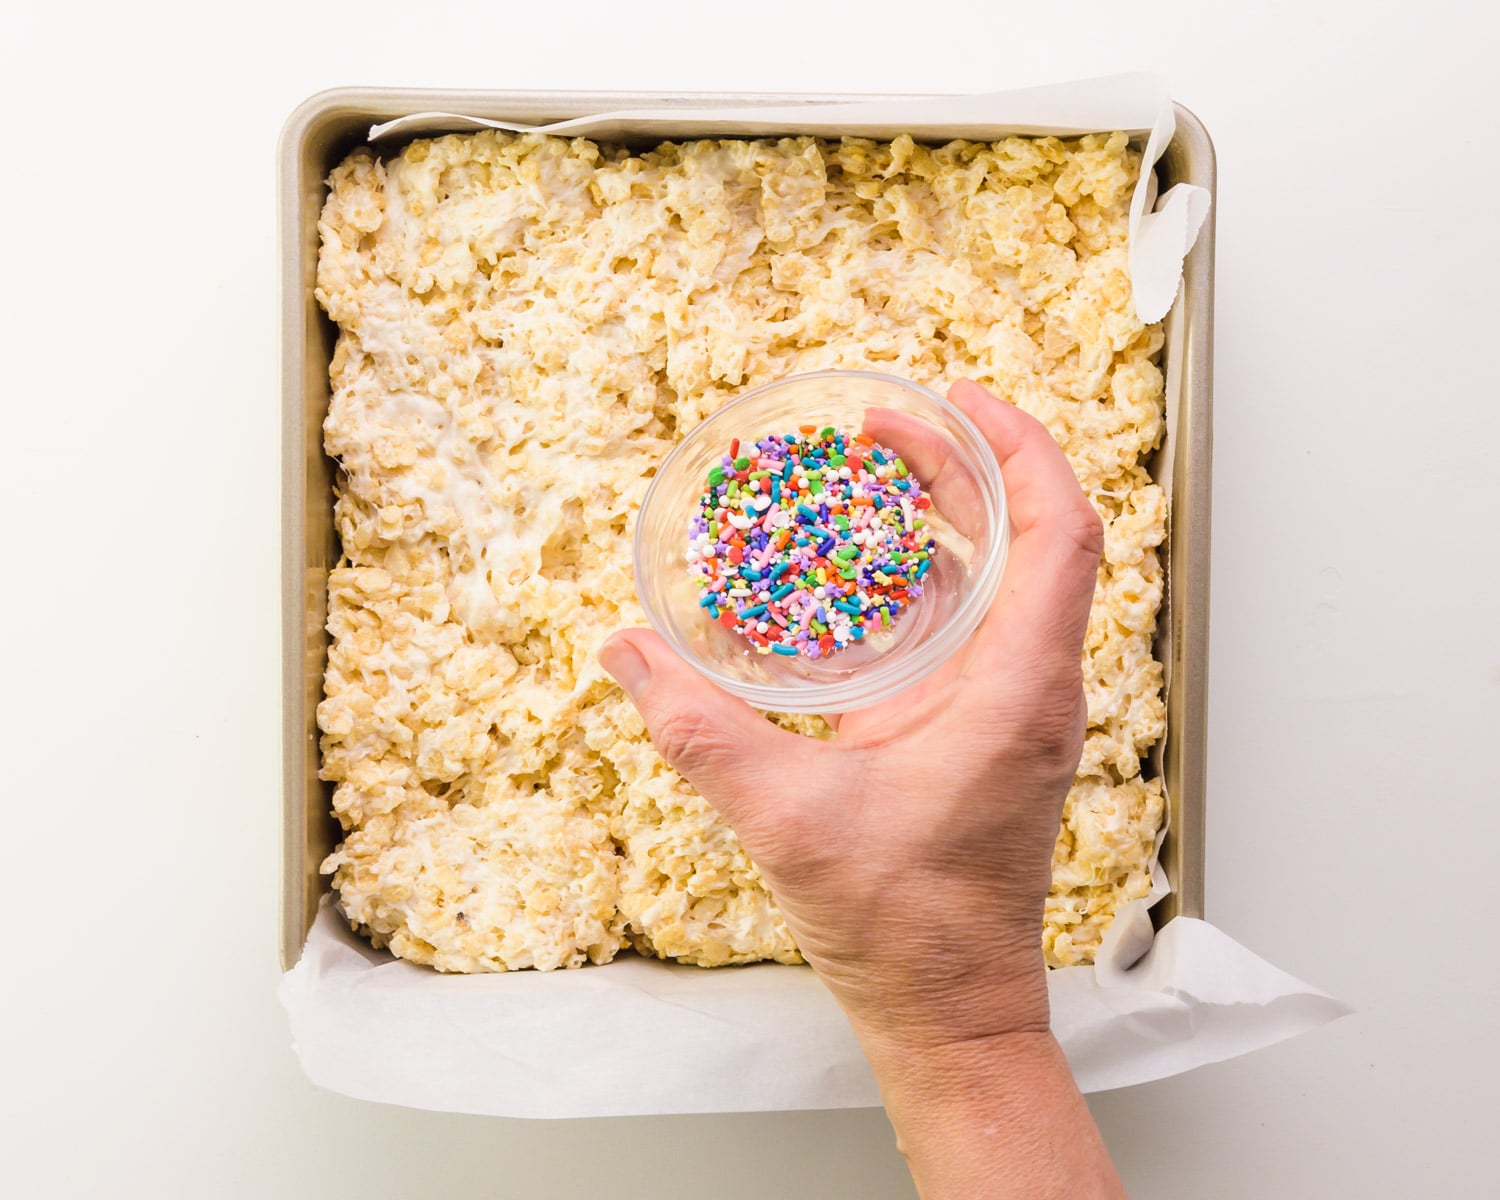 A hand holds a bowl of sprinkles over vegan Rice Krispies in a pan.